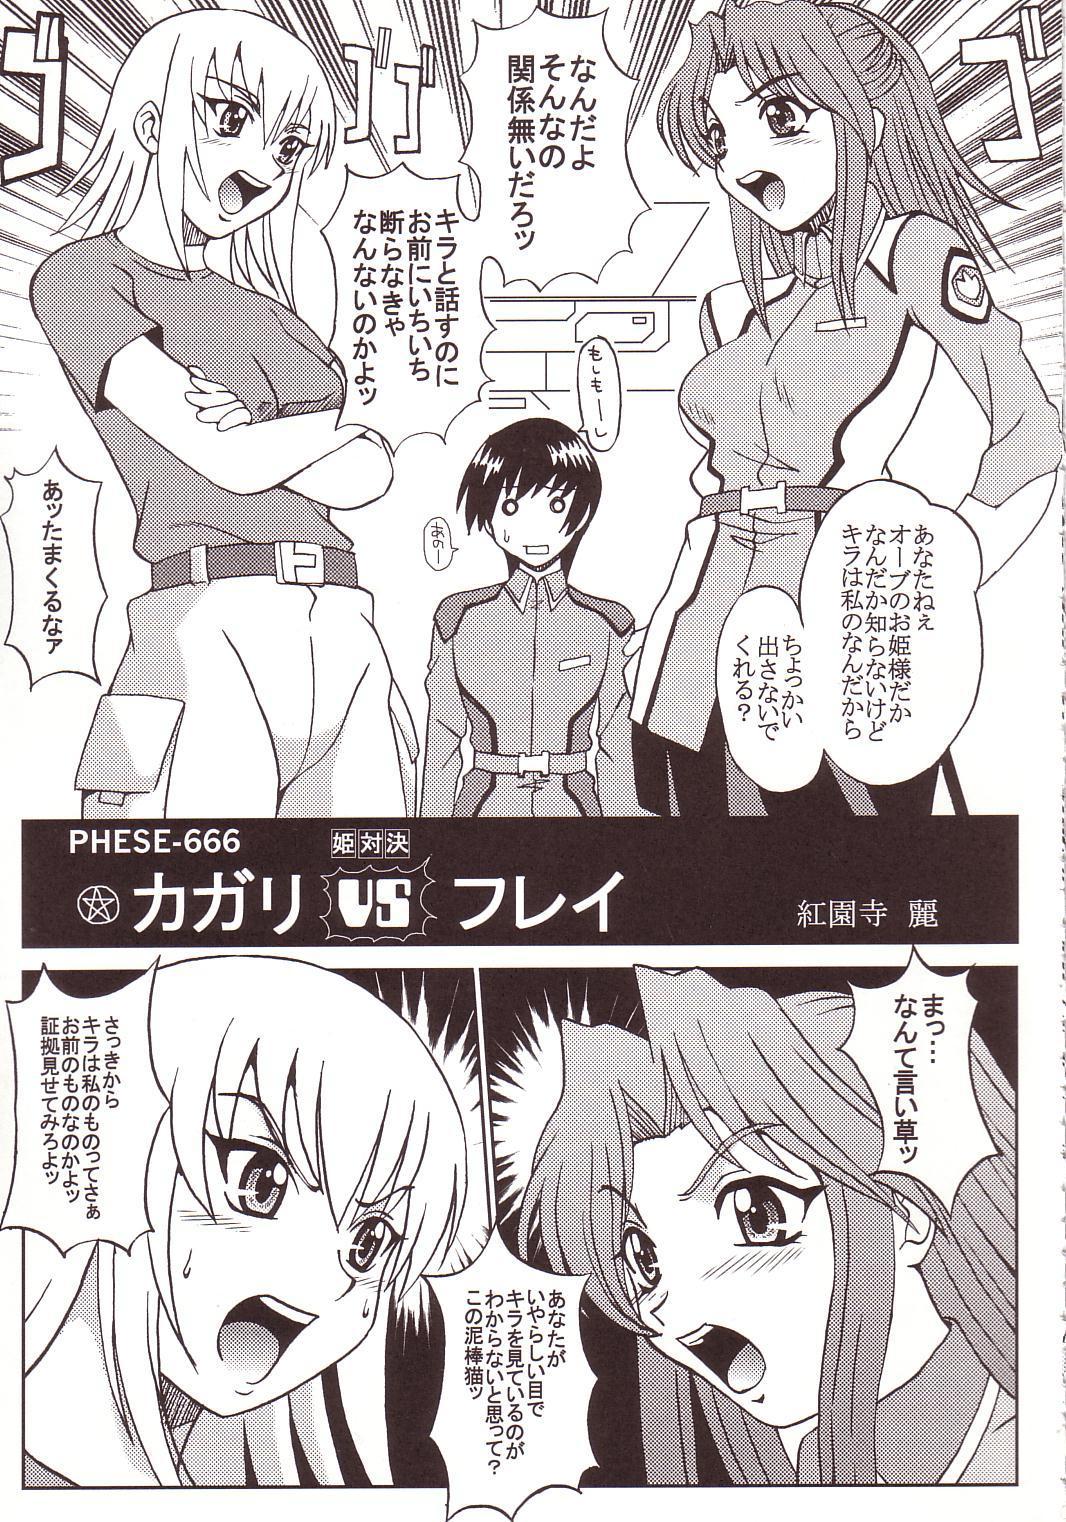 Francaise SEED - Gundam seed Pounded - Page 4